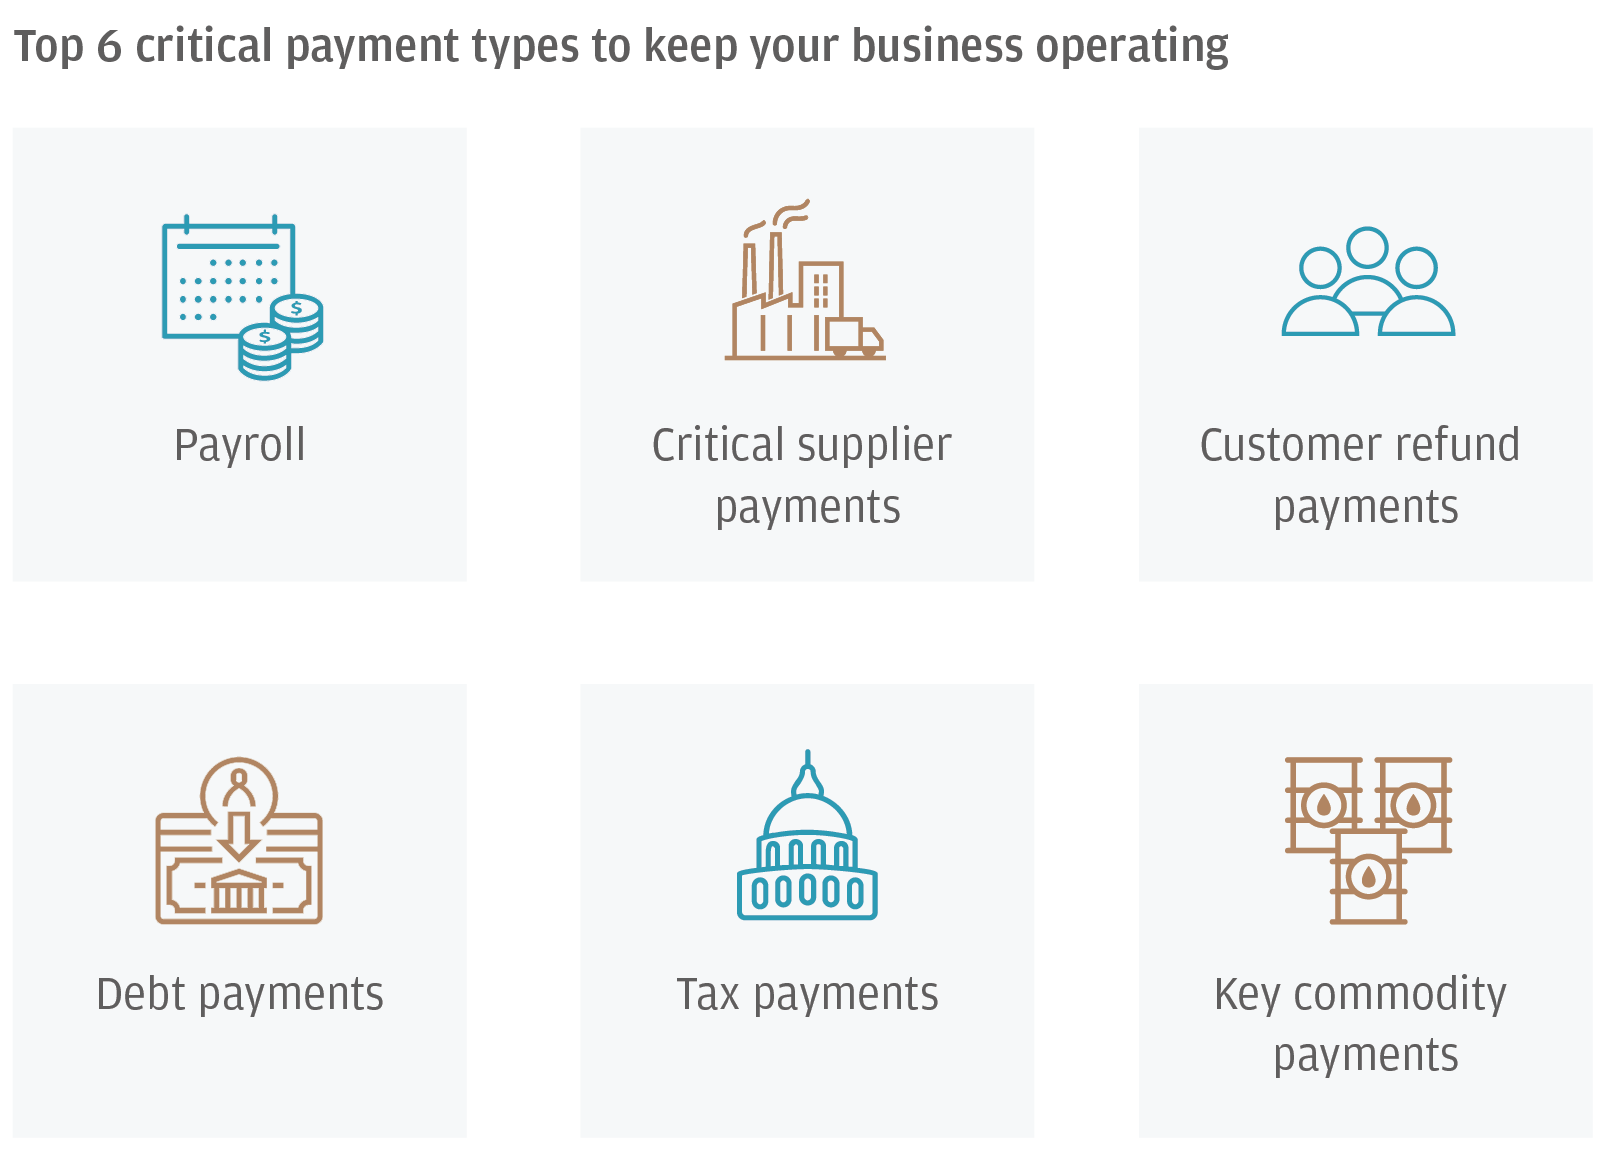 Top 6 critical payment types to keep your business operating